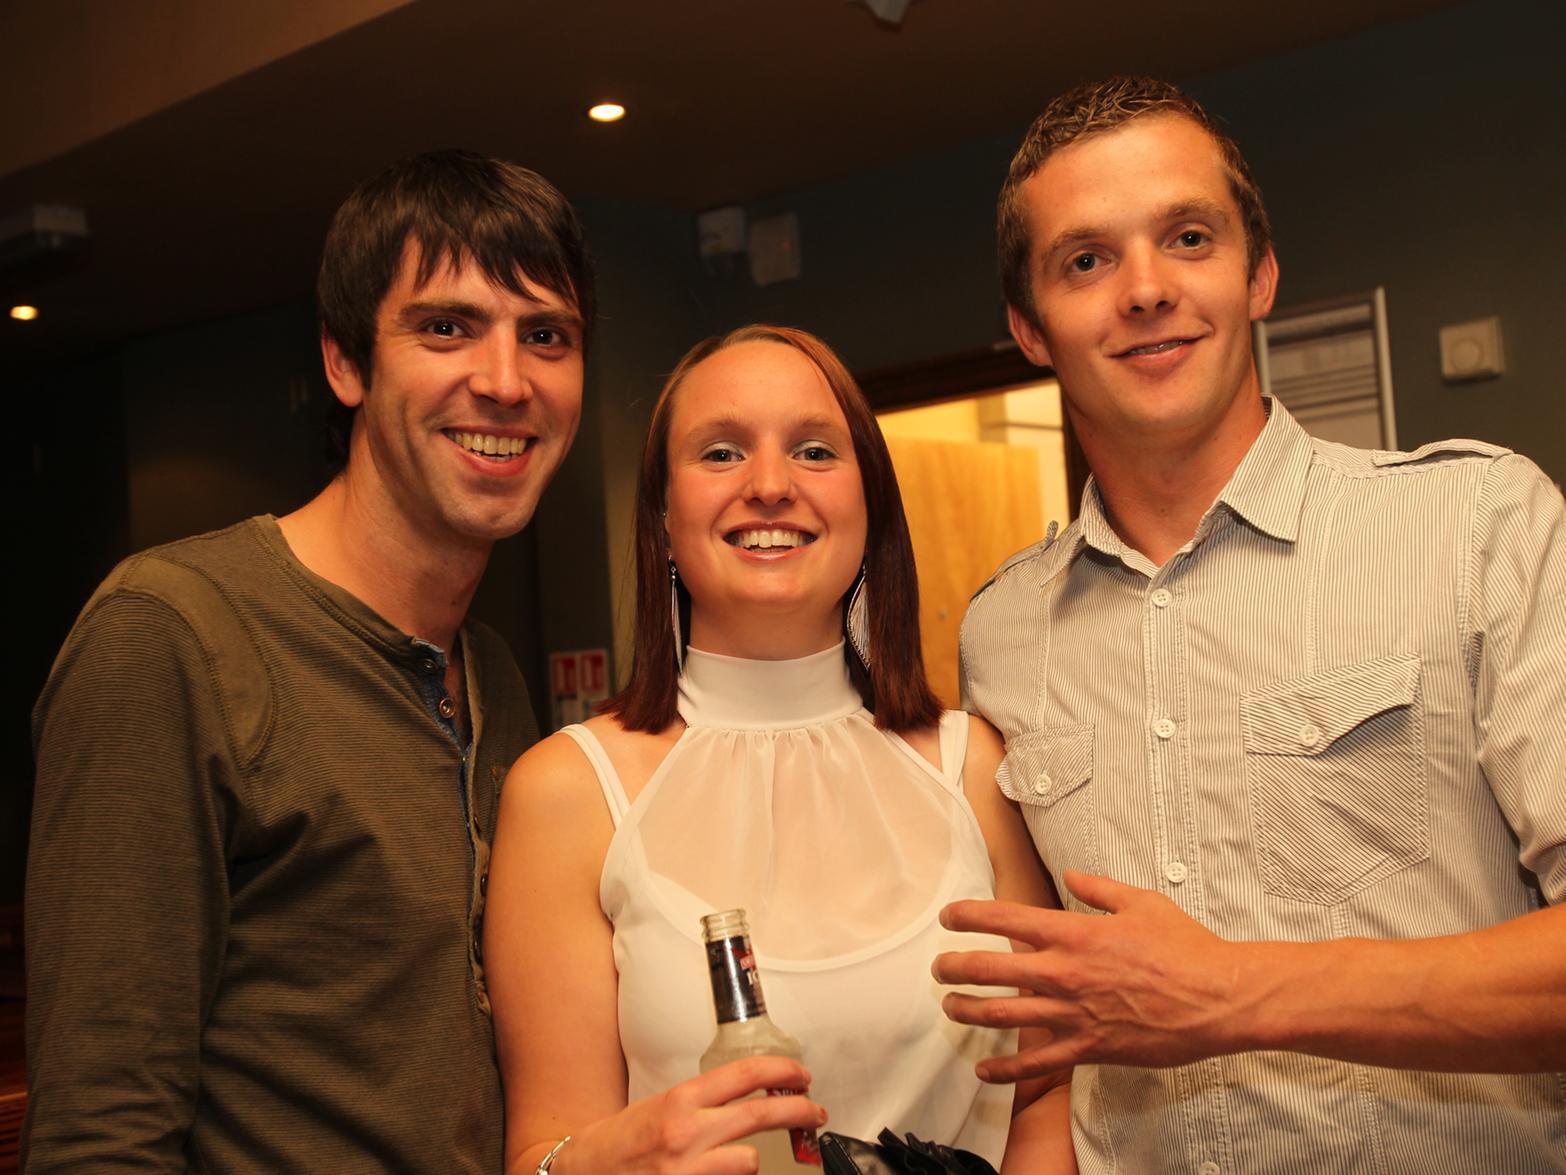 Ryan, Laura and Neil in Halifax back in 2012